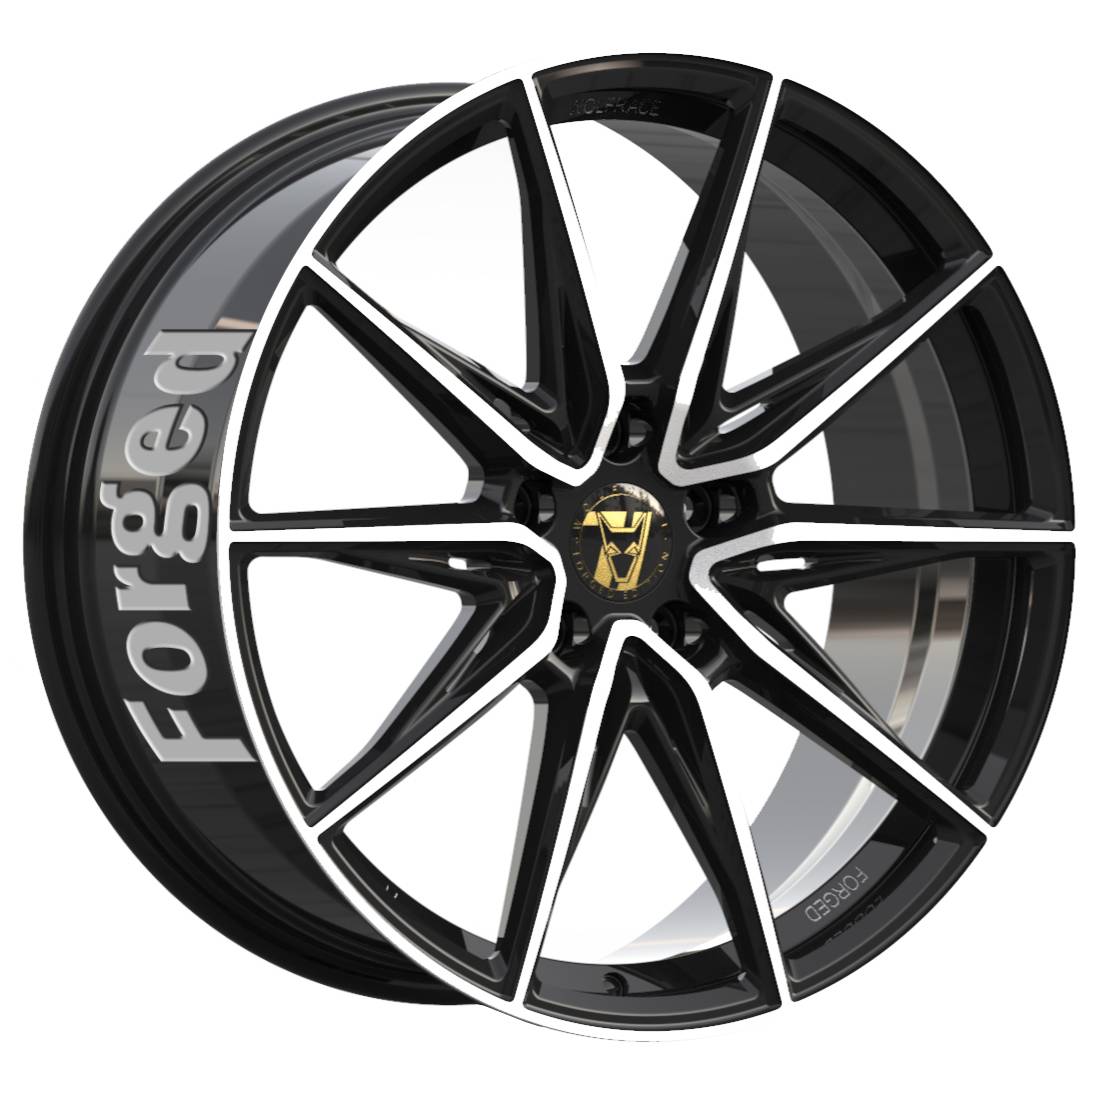 Jantes alu Demon Wheels 71 Forged Edition Urban Racer Forged [8.5x20] -5x114.3- ET 35